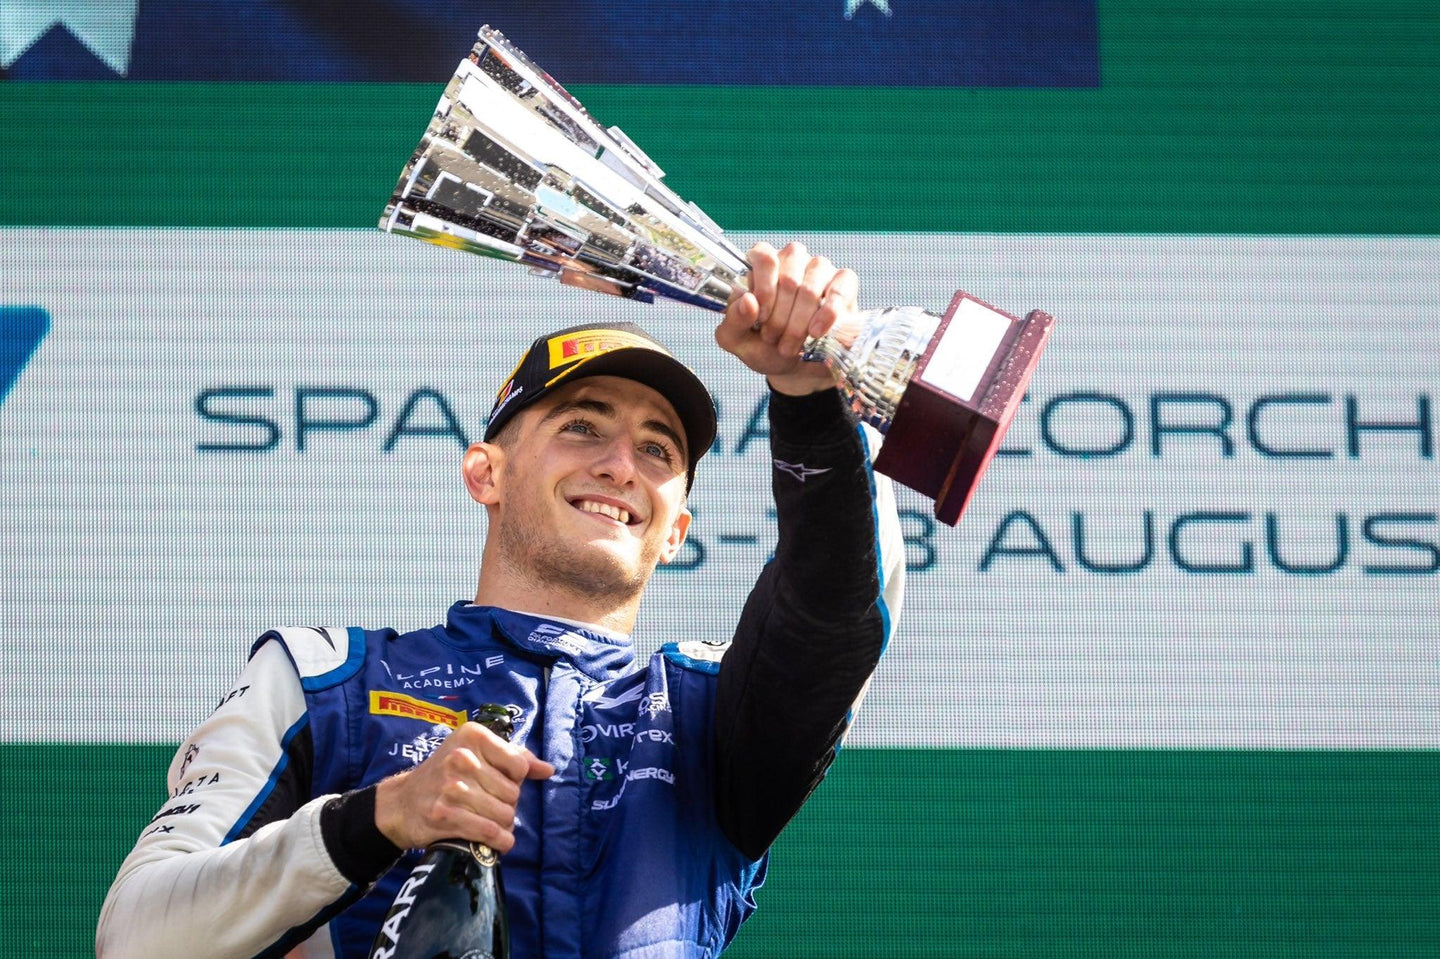 SERIES ROOKIE JACK DOOHAN SEALS F2 FEATURE RACE VICTORY IN NEAR-PERFECT WEEKEND AFTER SECOND PLACE FINISH IN THE SPRINT RACE AT SPA-FRANCORCHAMPS